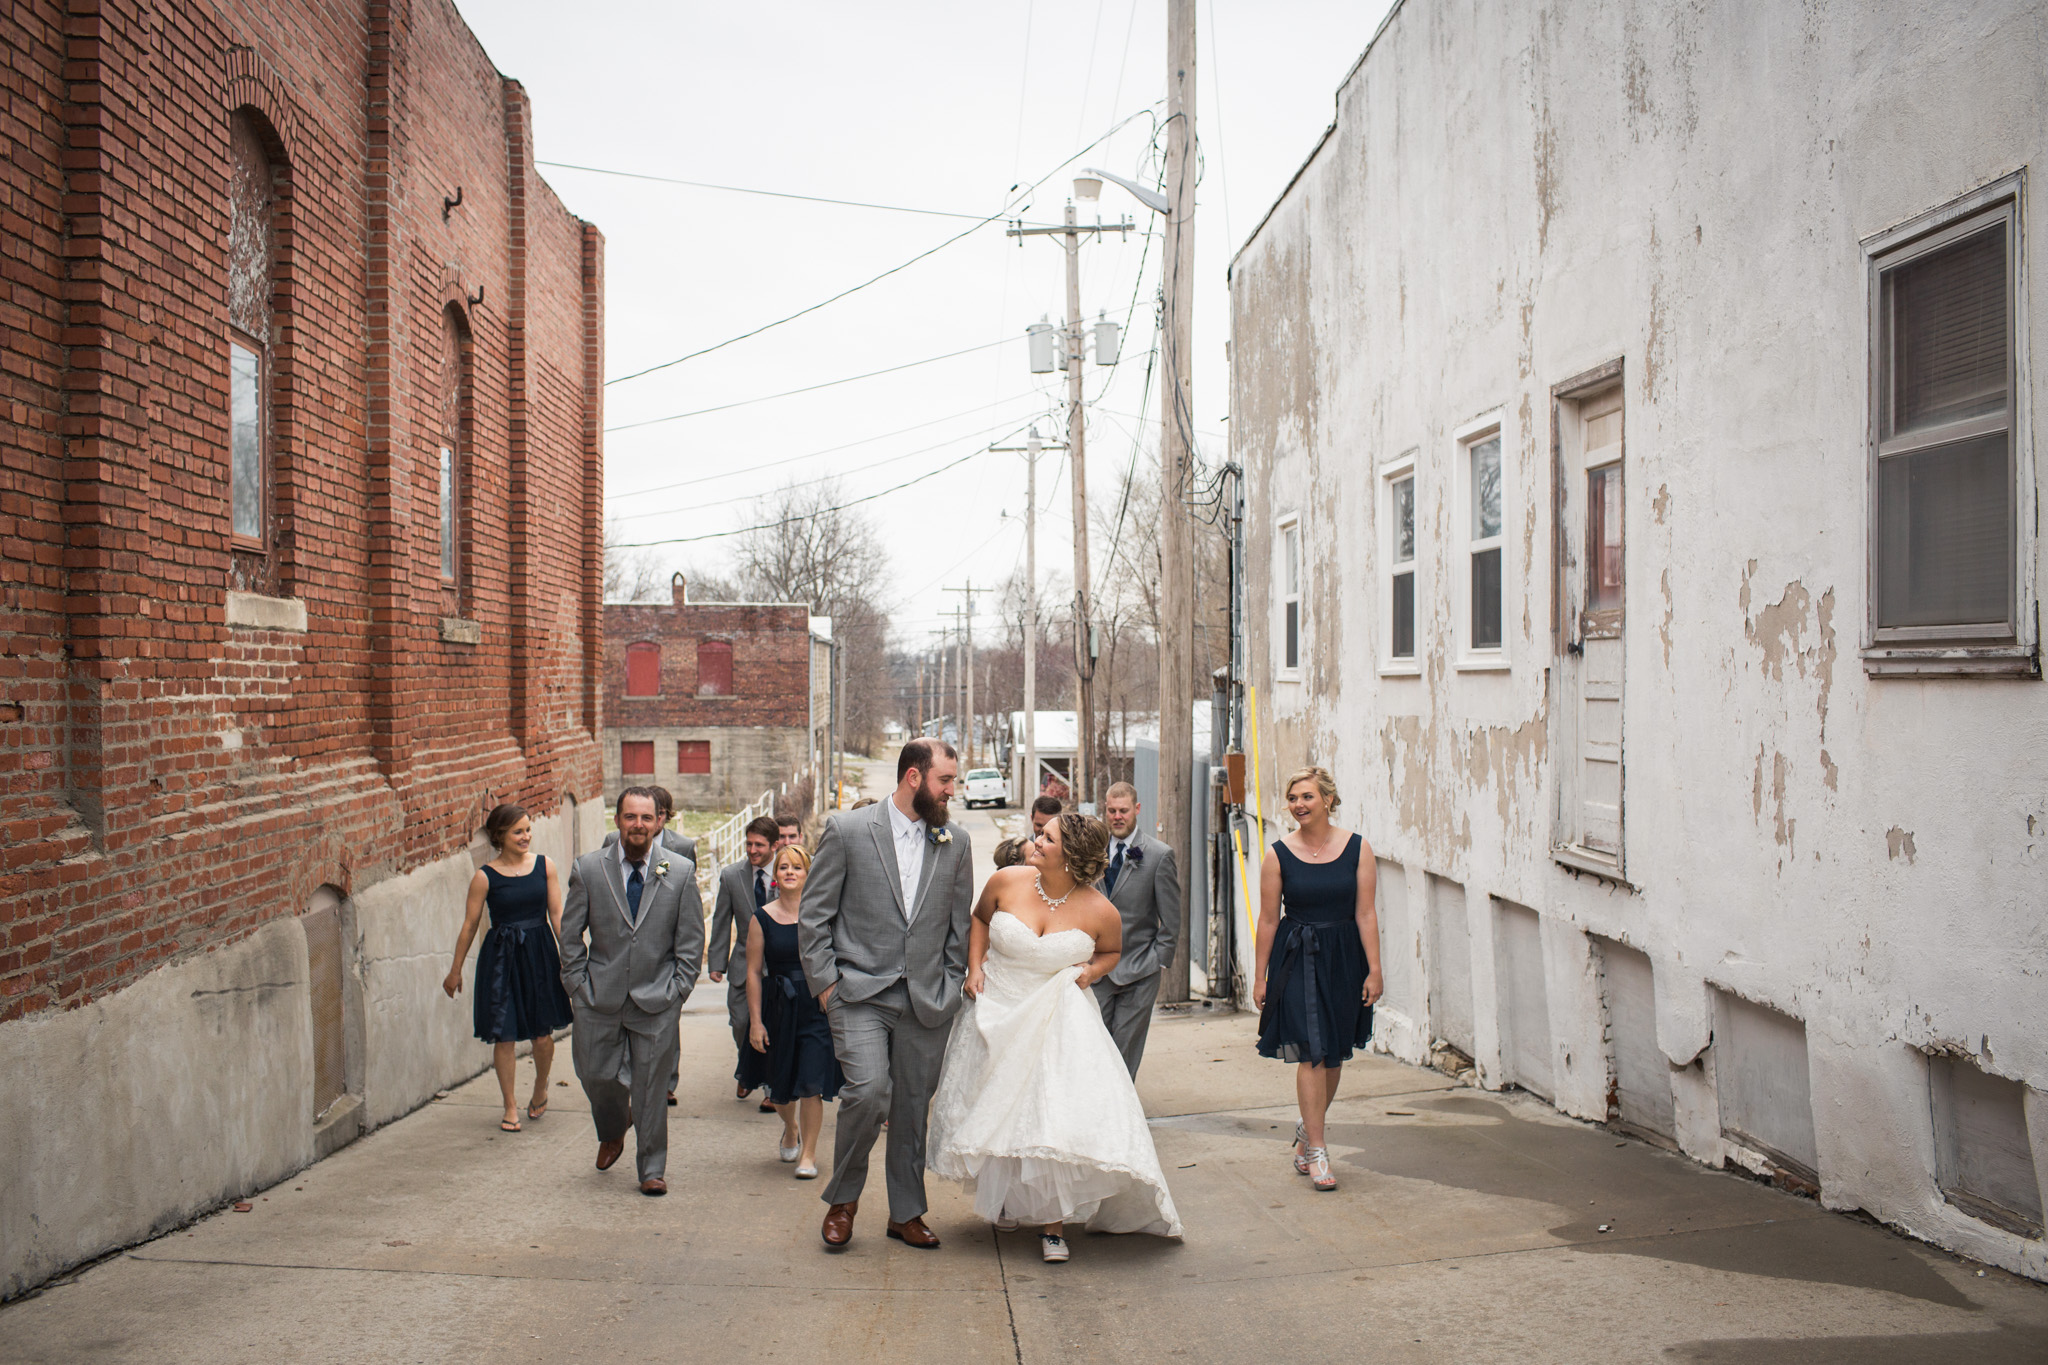 Zibell Spring Wedding, Bride and Groom, Powerful, Connected, Exploration, Laura Duggleby Photography -99.JPG